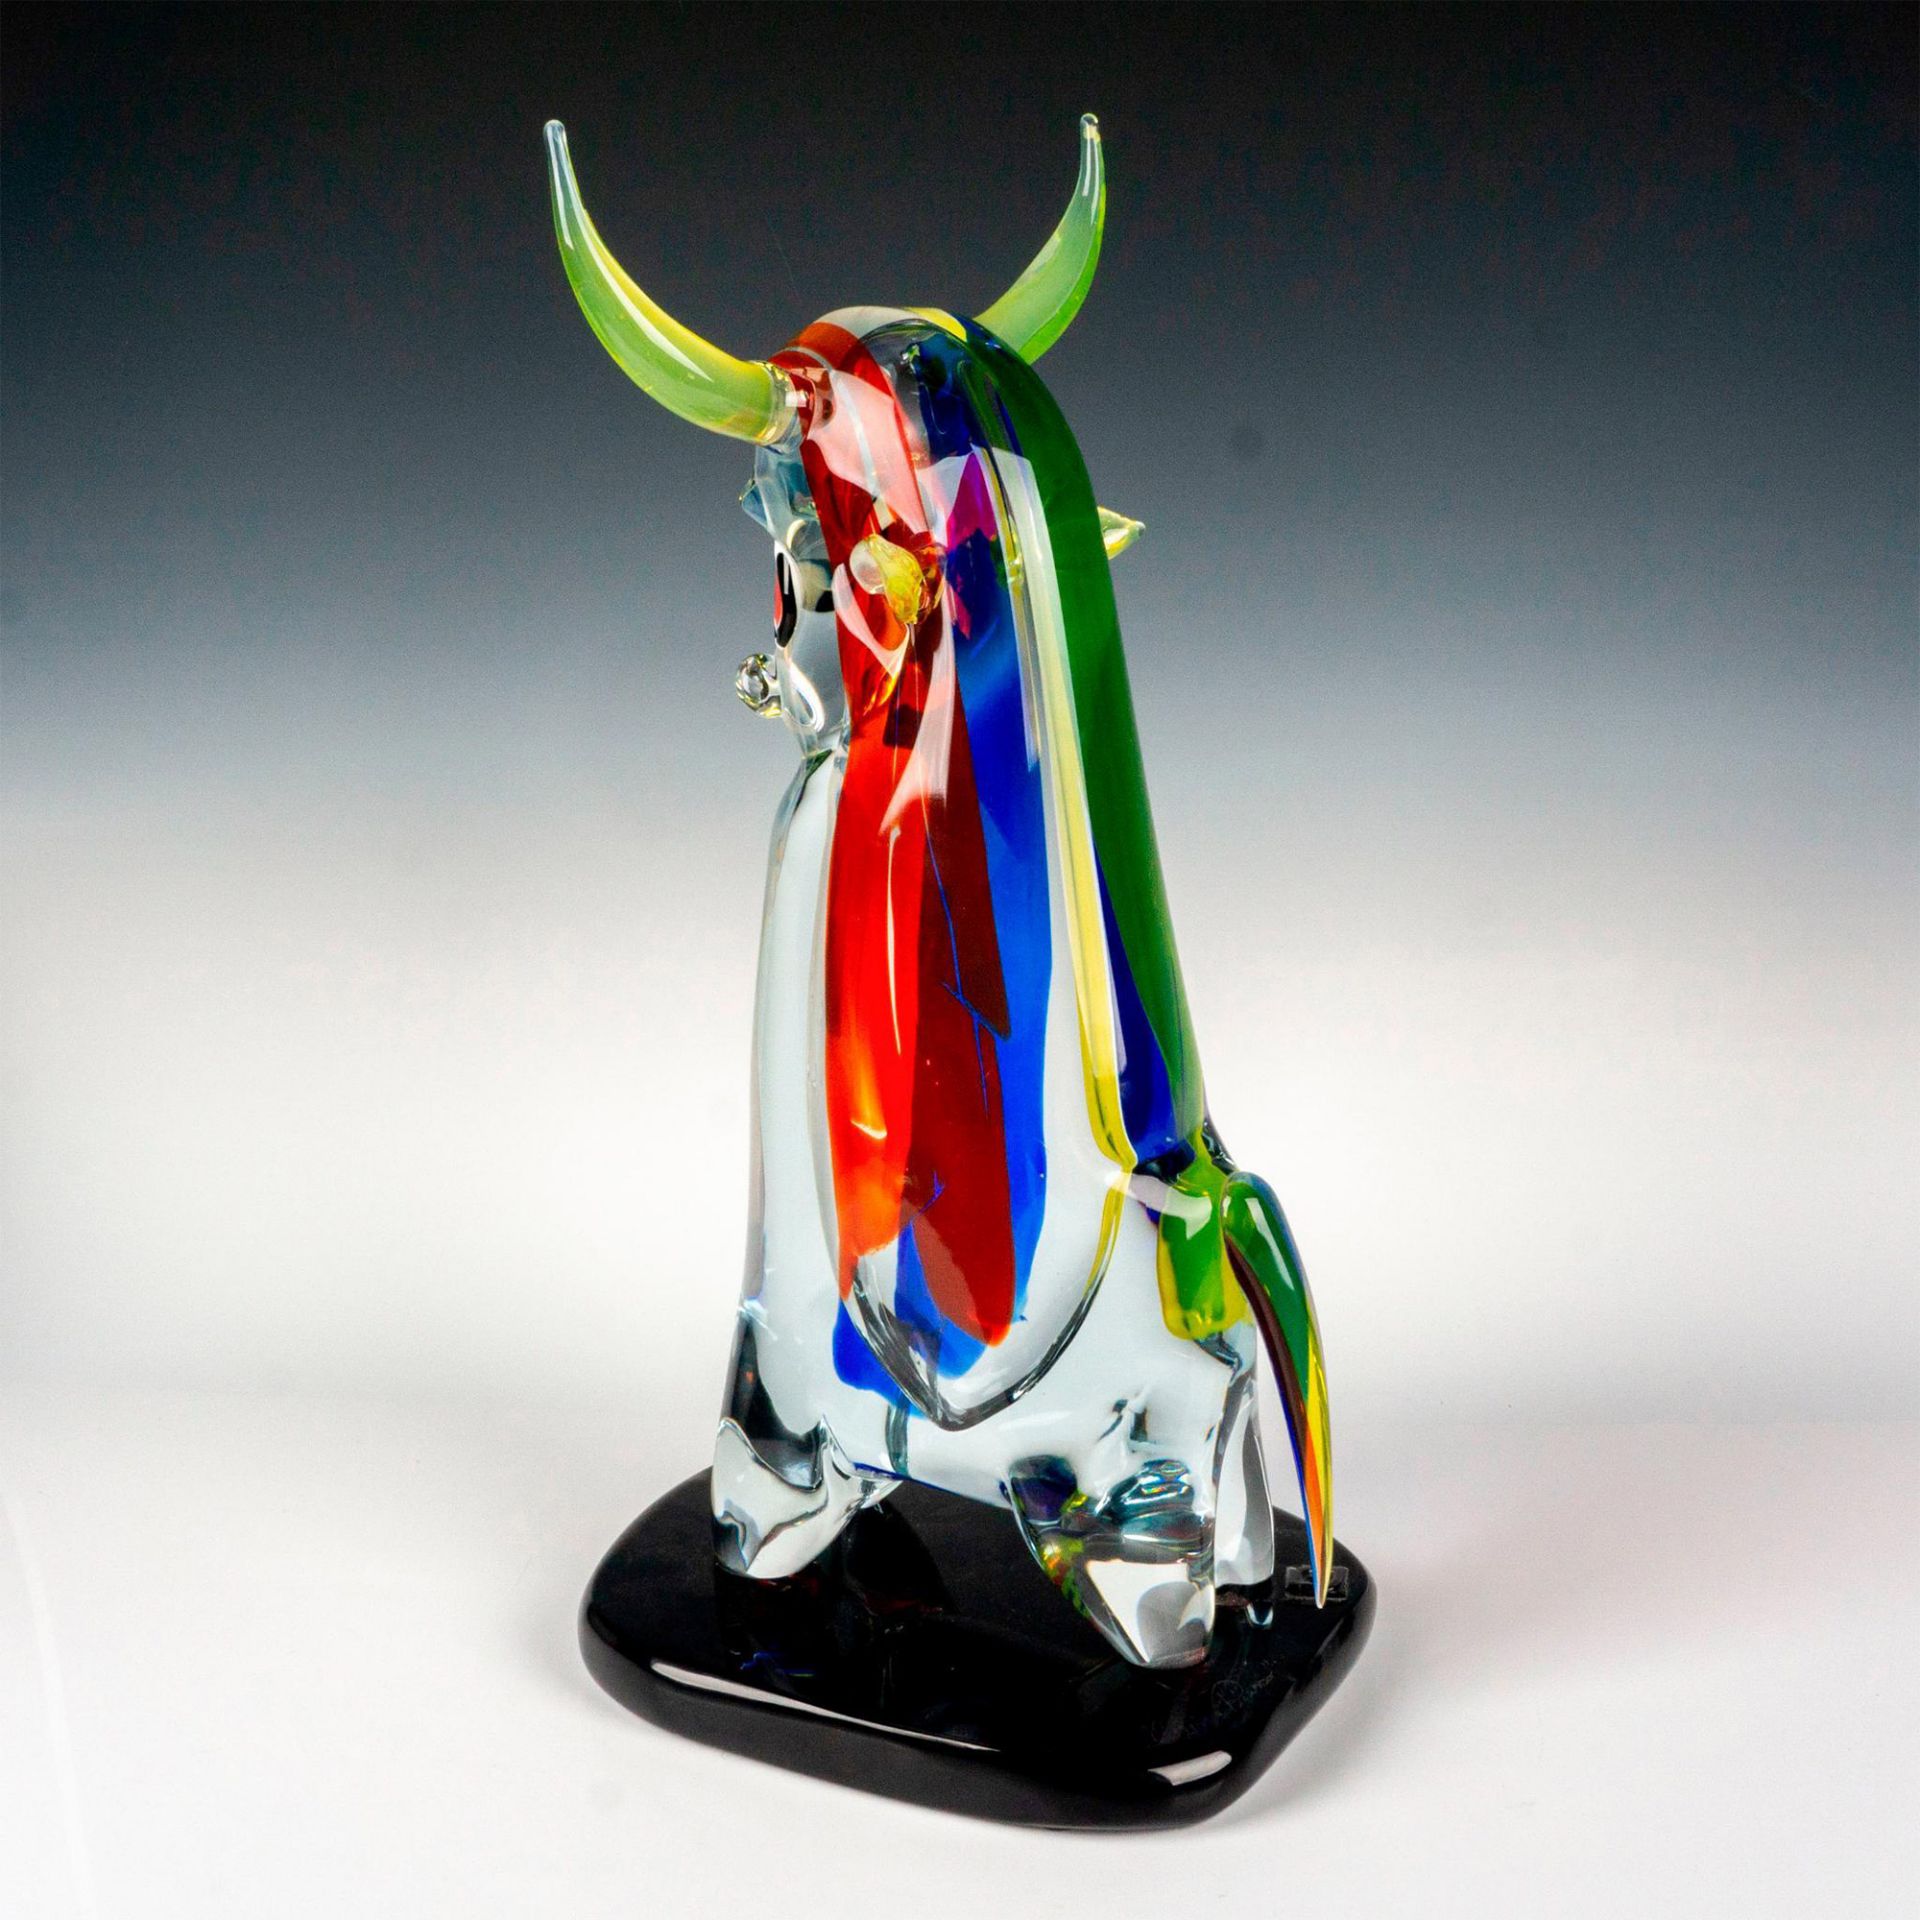 Murano Glass by Walter Furlan Sculpture, Toretto Signed - Image 2 of 8